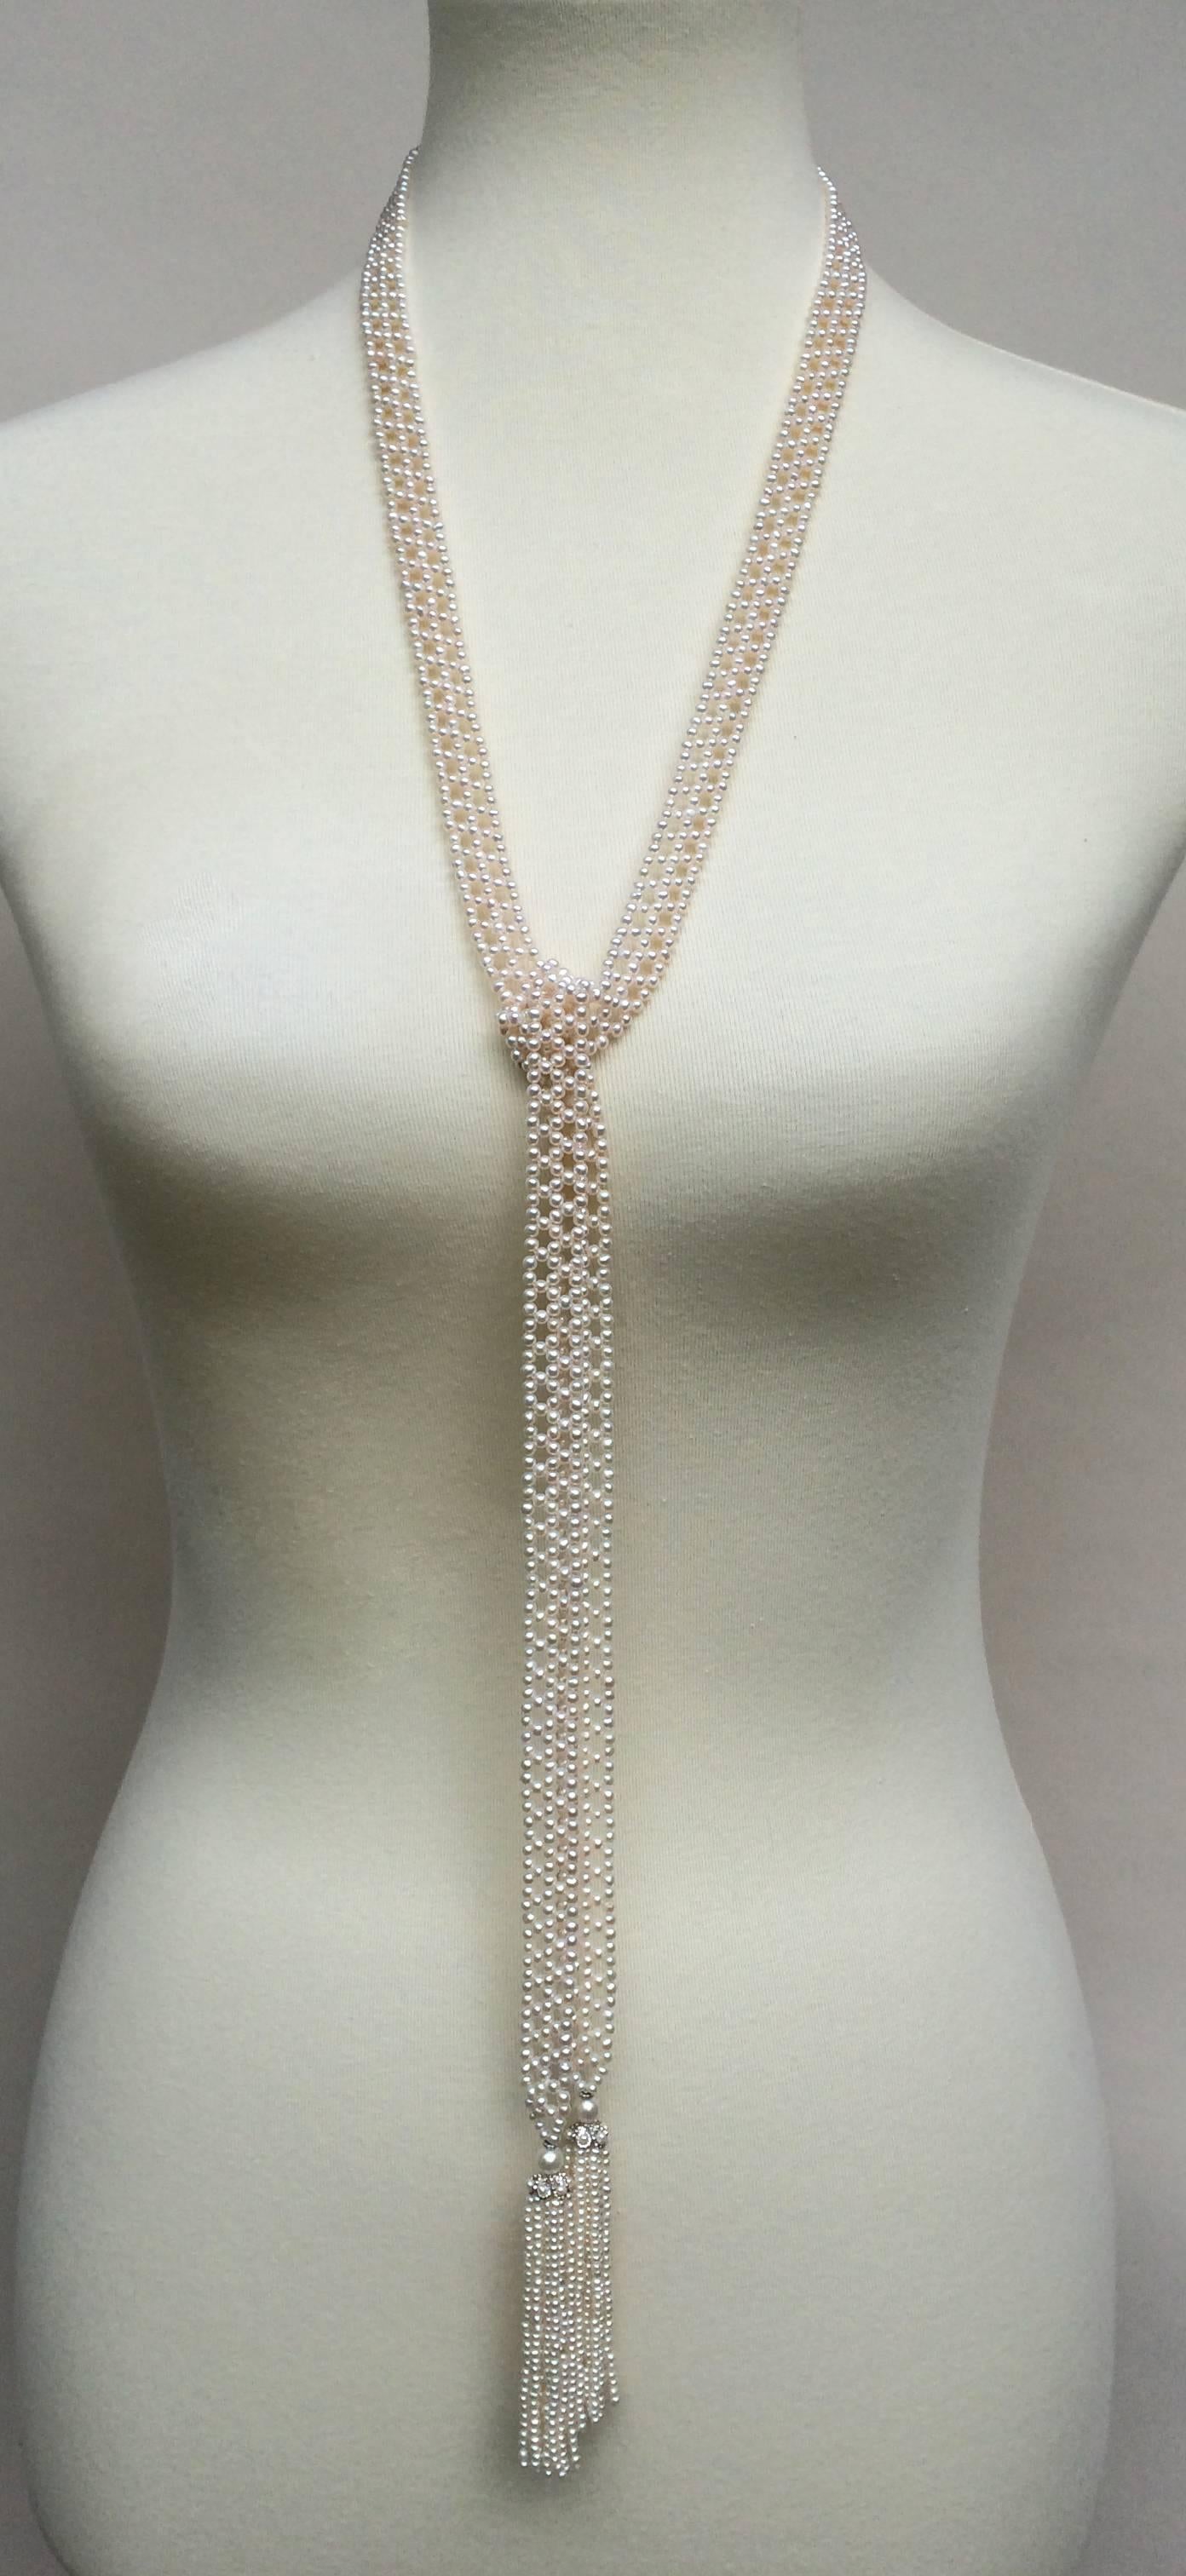 Marina J. presents a unique handmade sautoir necklace, made of small white 2- 2.5 mm pearls and woven into a complex, double lace-like design. The ends of the necklace taper into small pearls, and are complimented by white gold roundels. The lush